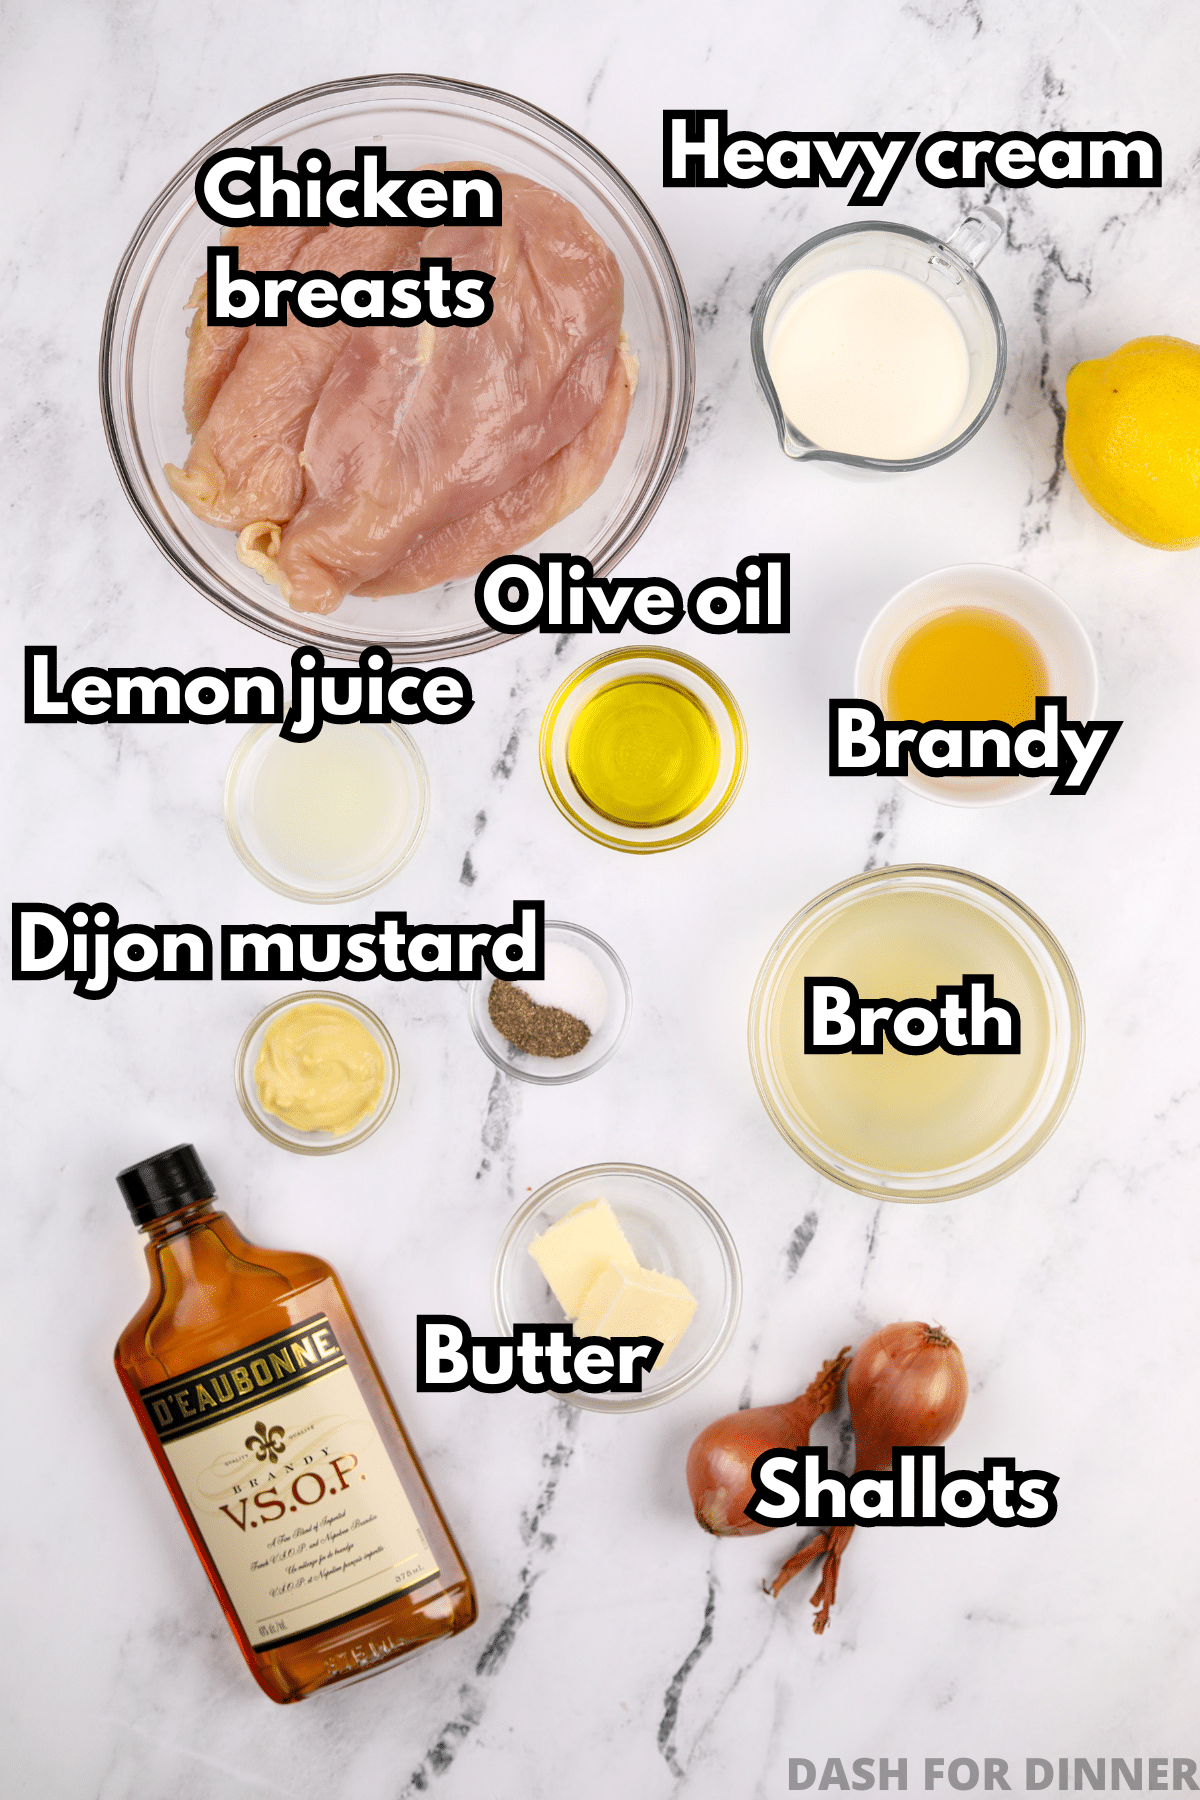 The ingredients needed to make chicken diane, including brandy, broth, mustard, olive oil, and butter.